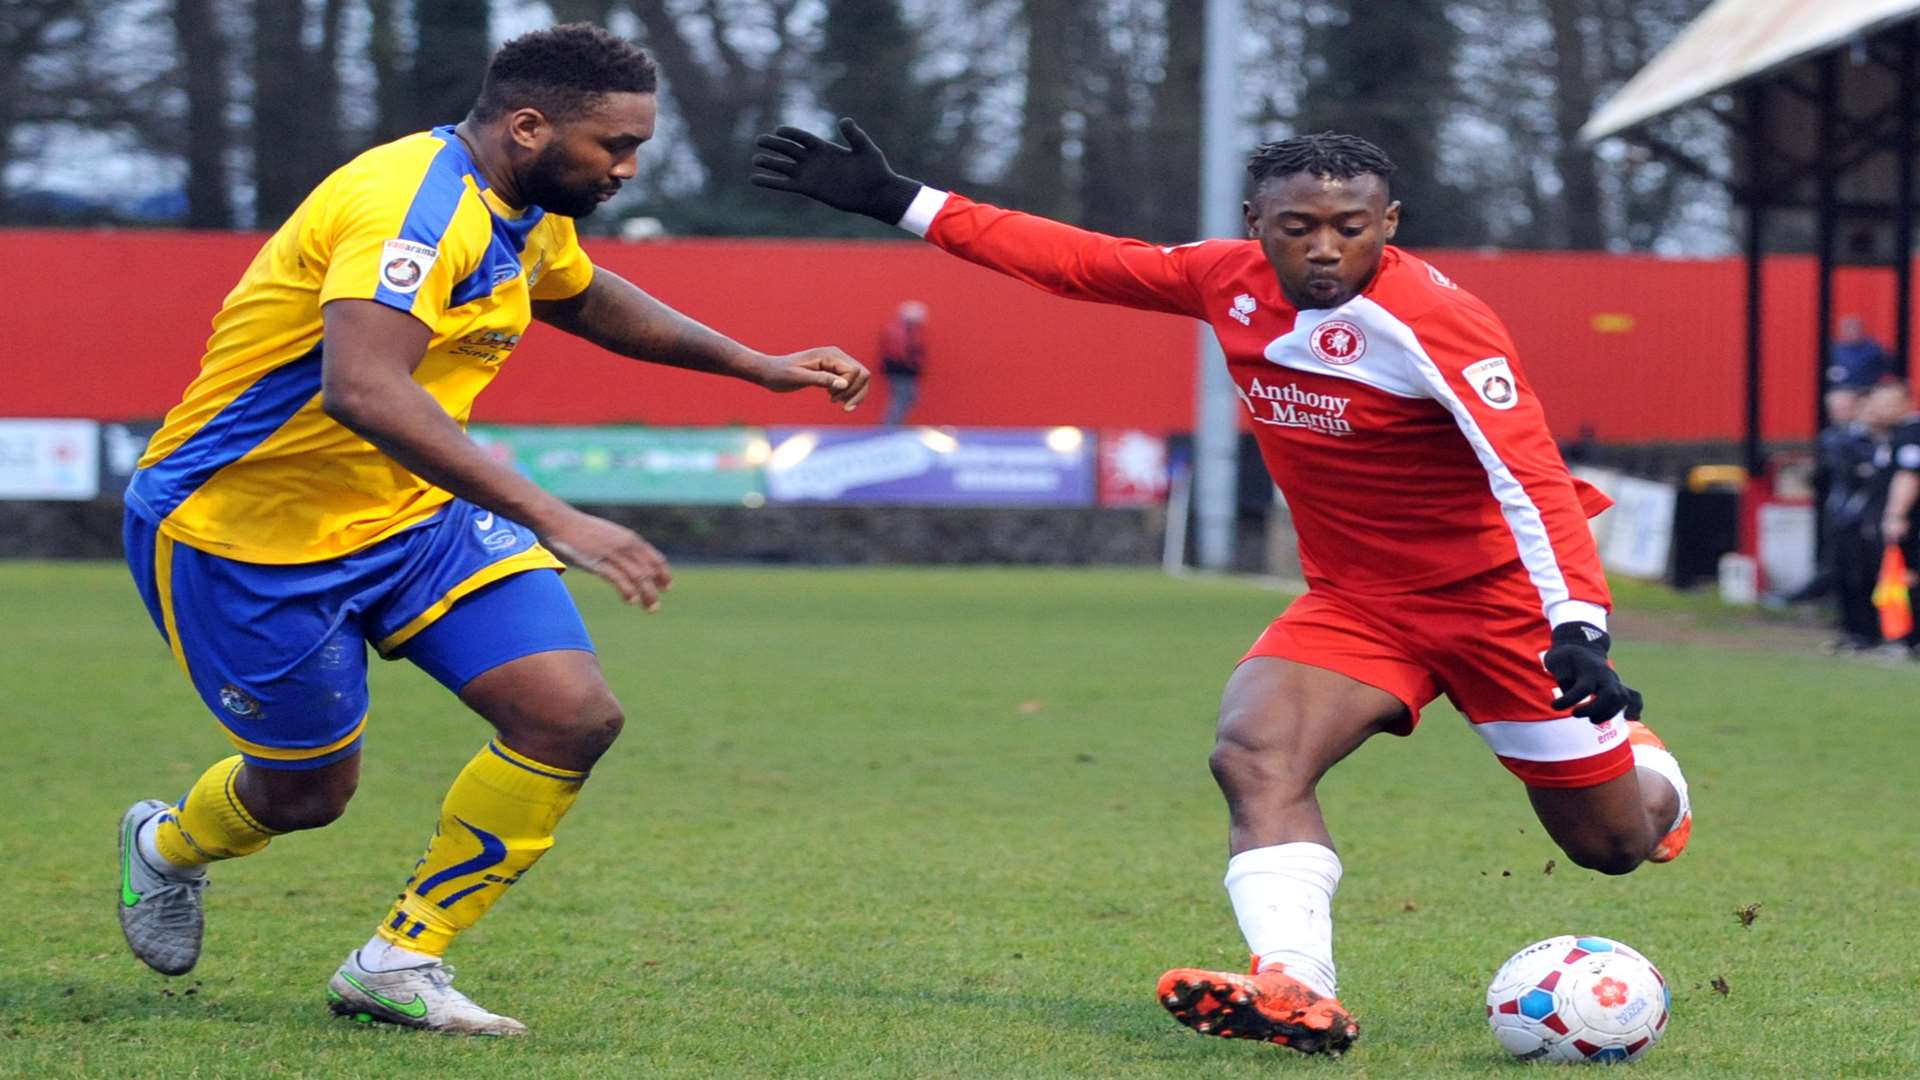 Welling's Kadell Daniel takes on his man. Picture: David Brown